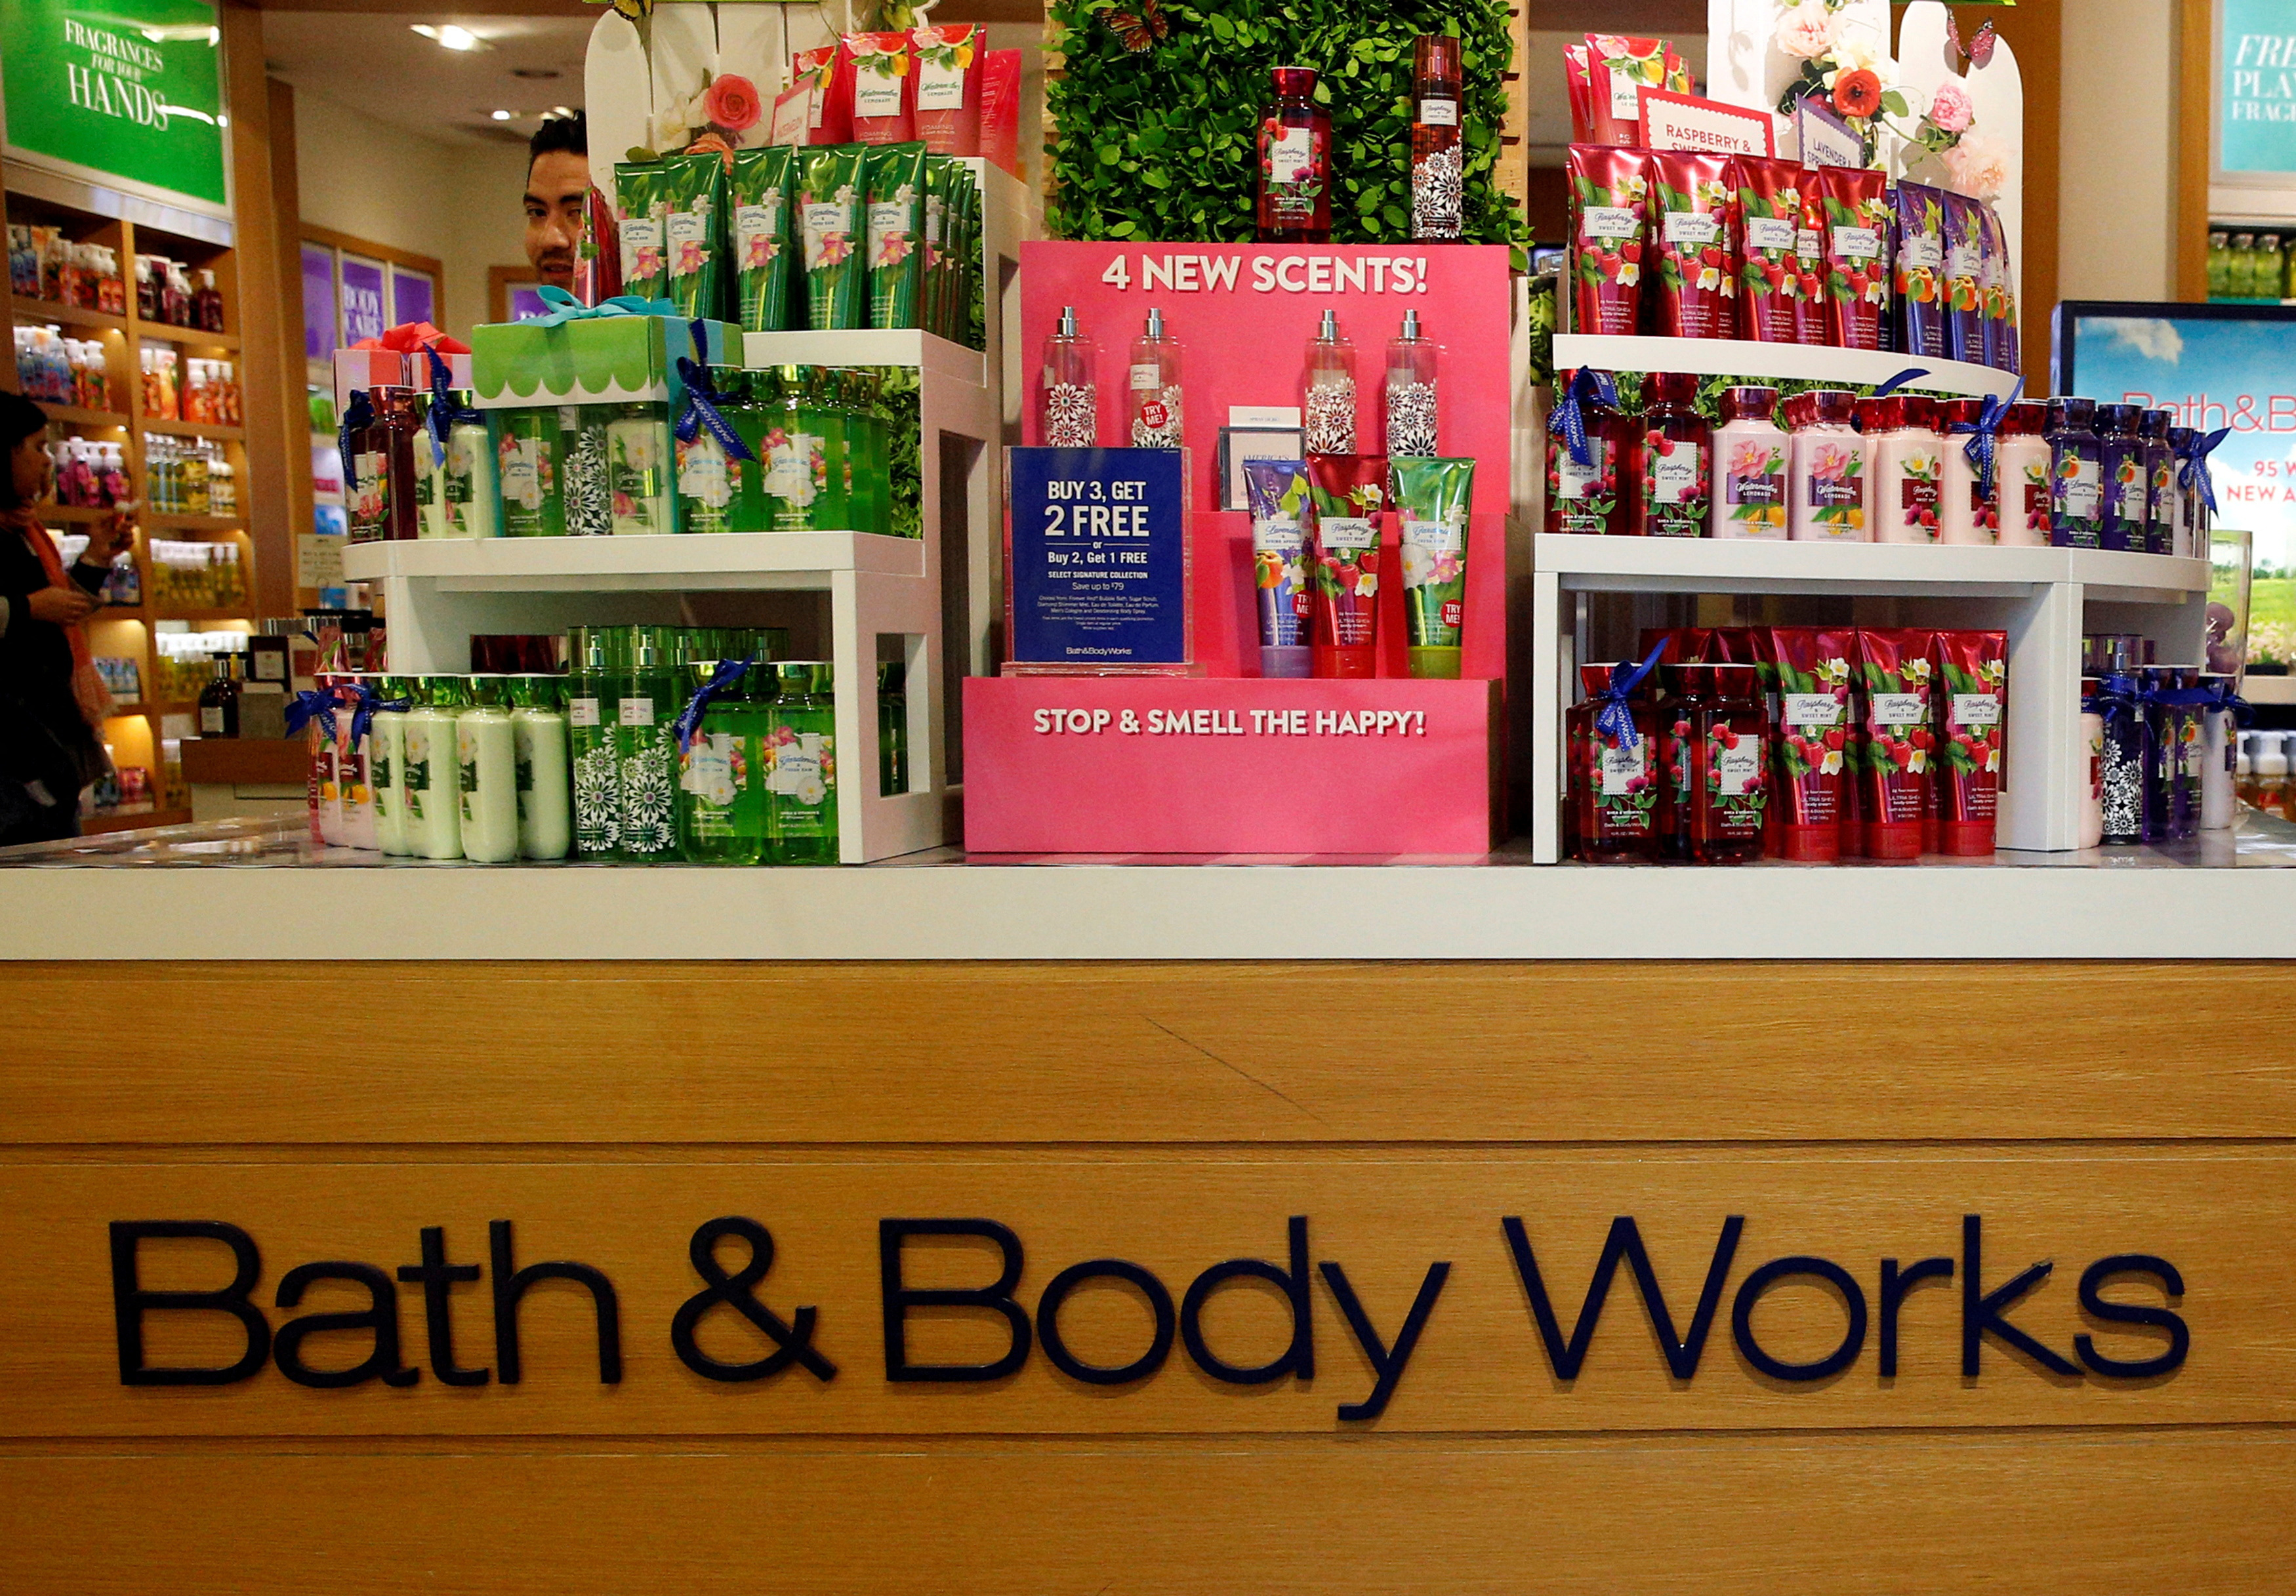 Products are displayed in L Brands Inc., Bath & Body Works retail store in Manhattan, New York